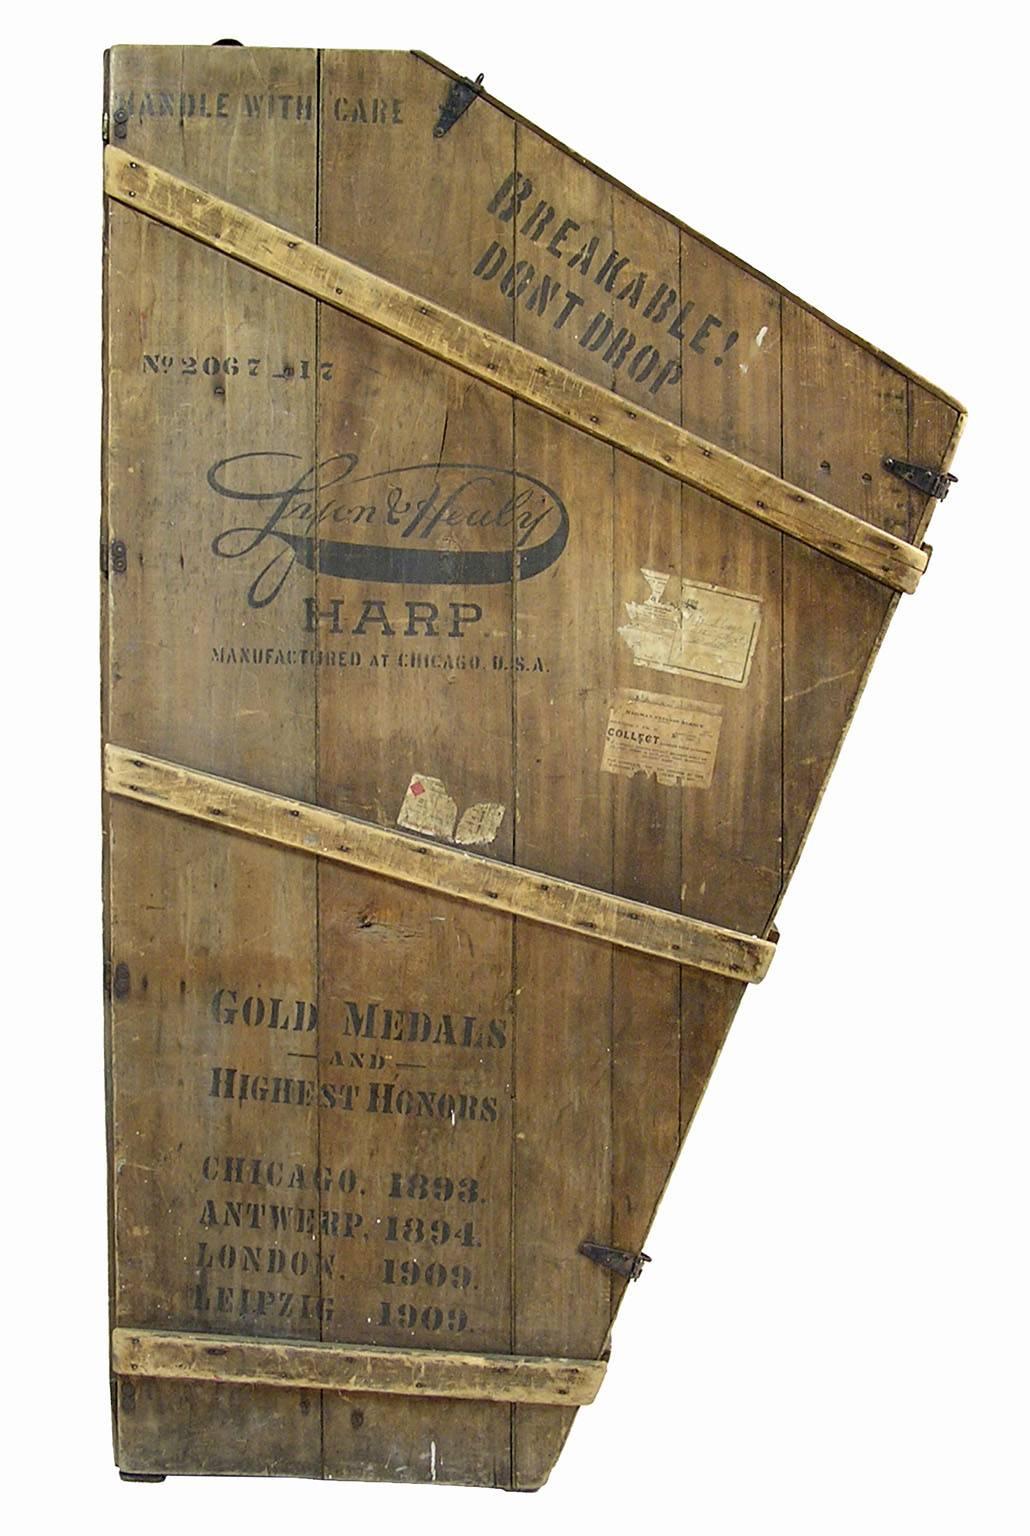 Fantastic Lyon and Healy harp crate from the early 1920s. We found this beauty at a local house call, went to look at a dining suite and left with this incredible crate. Let your imagination run wild with this piece and turn it into a one-of-a-kind